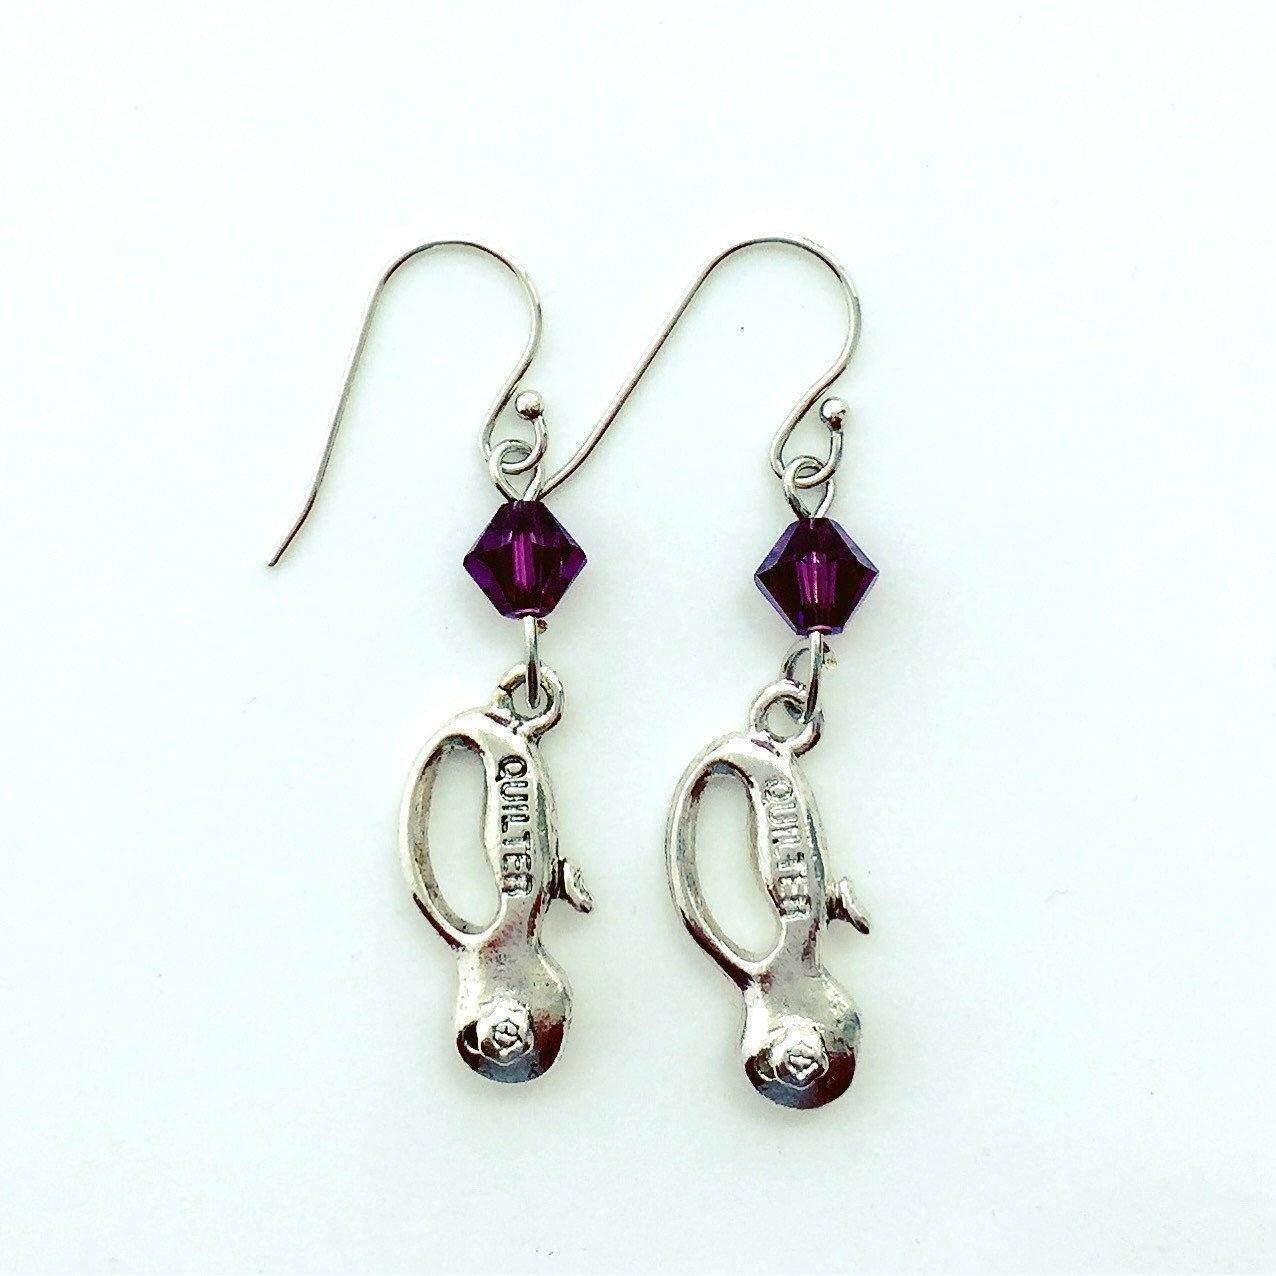 Quilt Cutter Silver Earrings with Purple Swarovski Crystals-Watchus